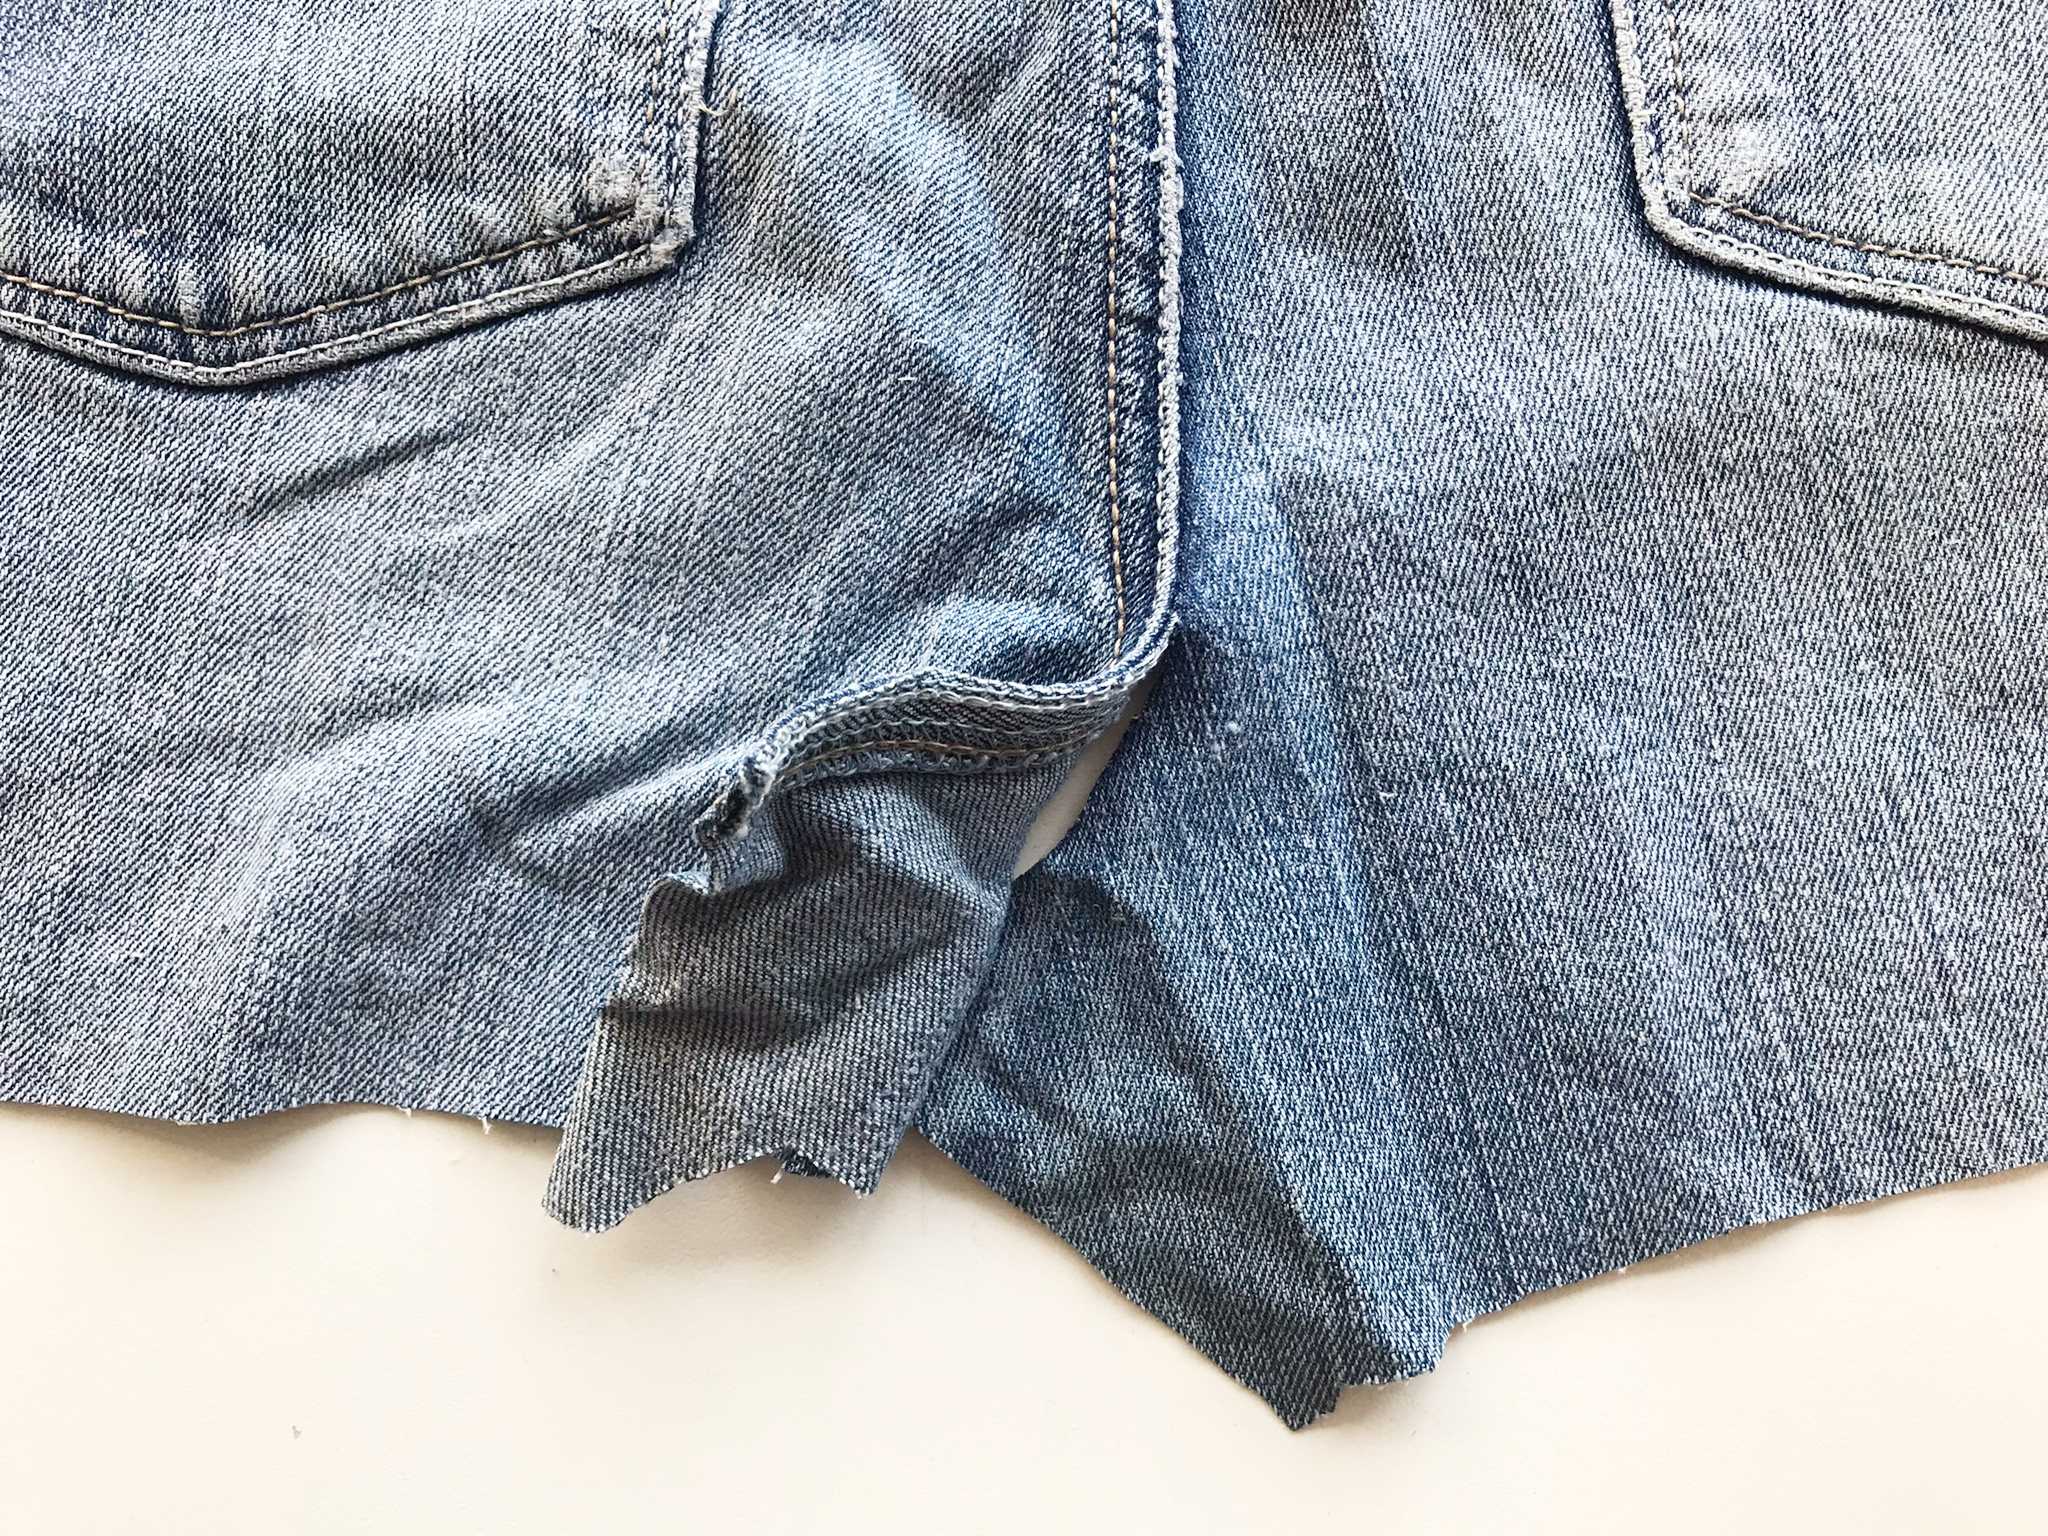 How to Make a Cute Denim Apron from Old Jeans (Sew or No Sew)